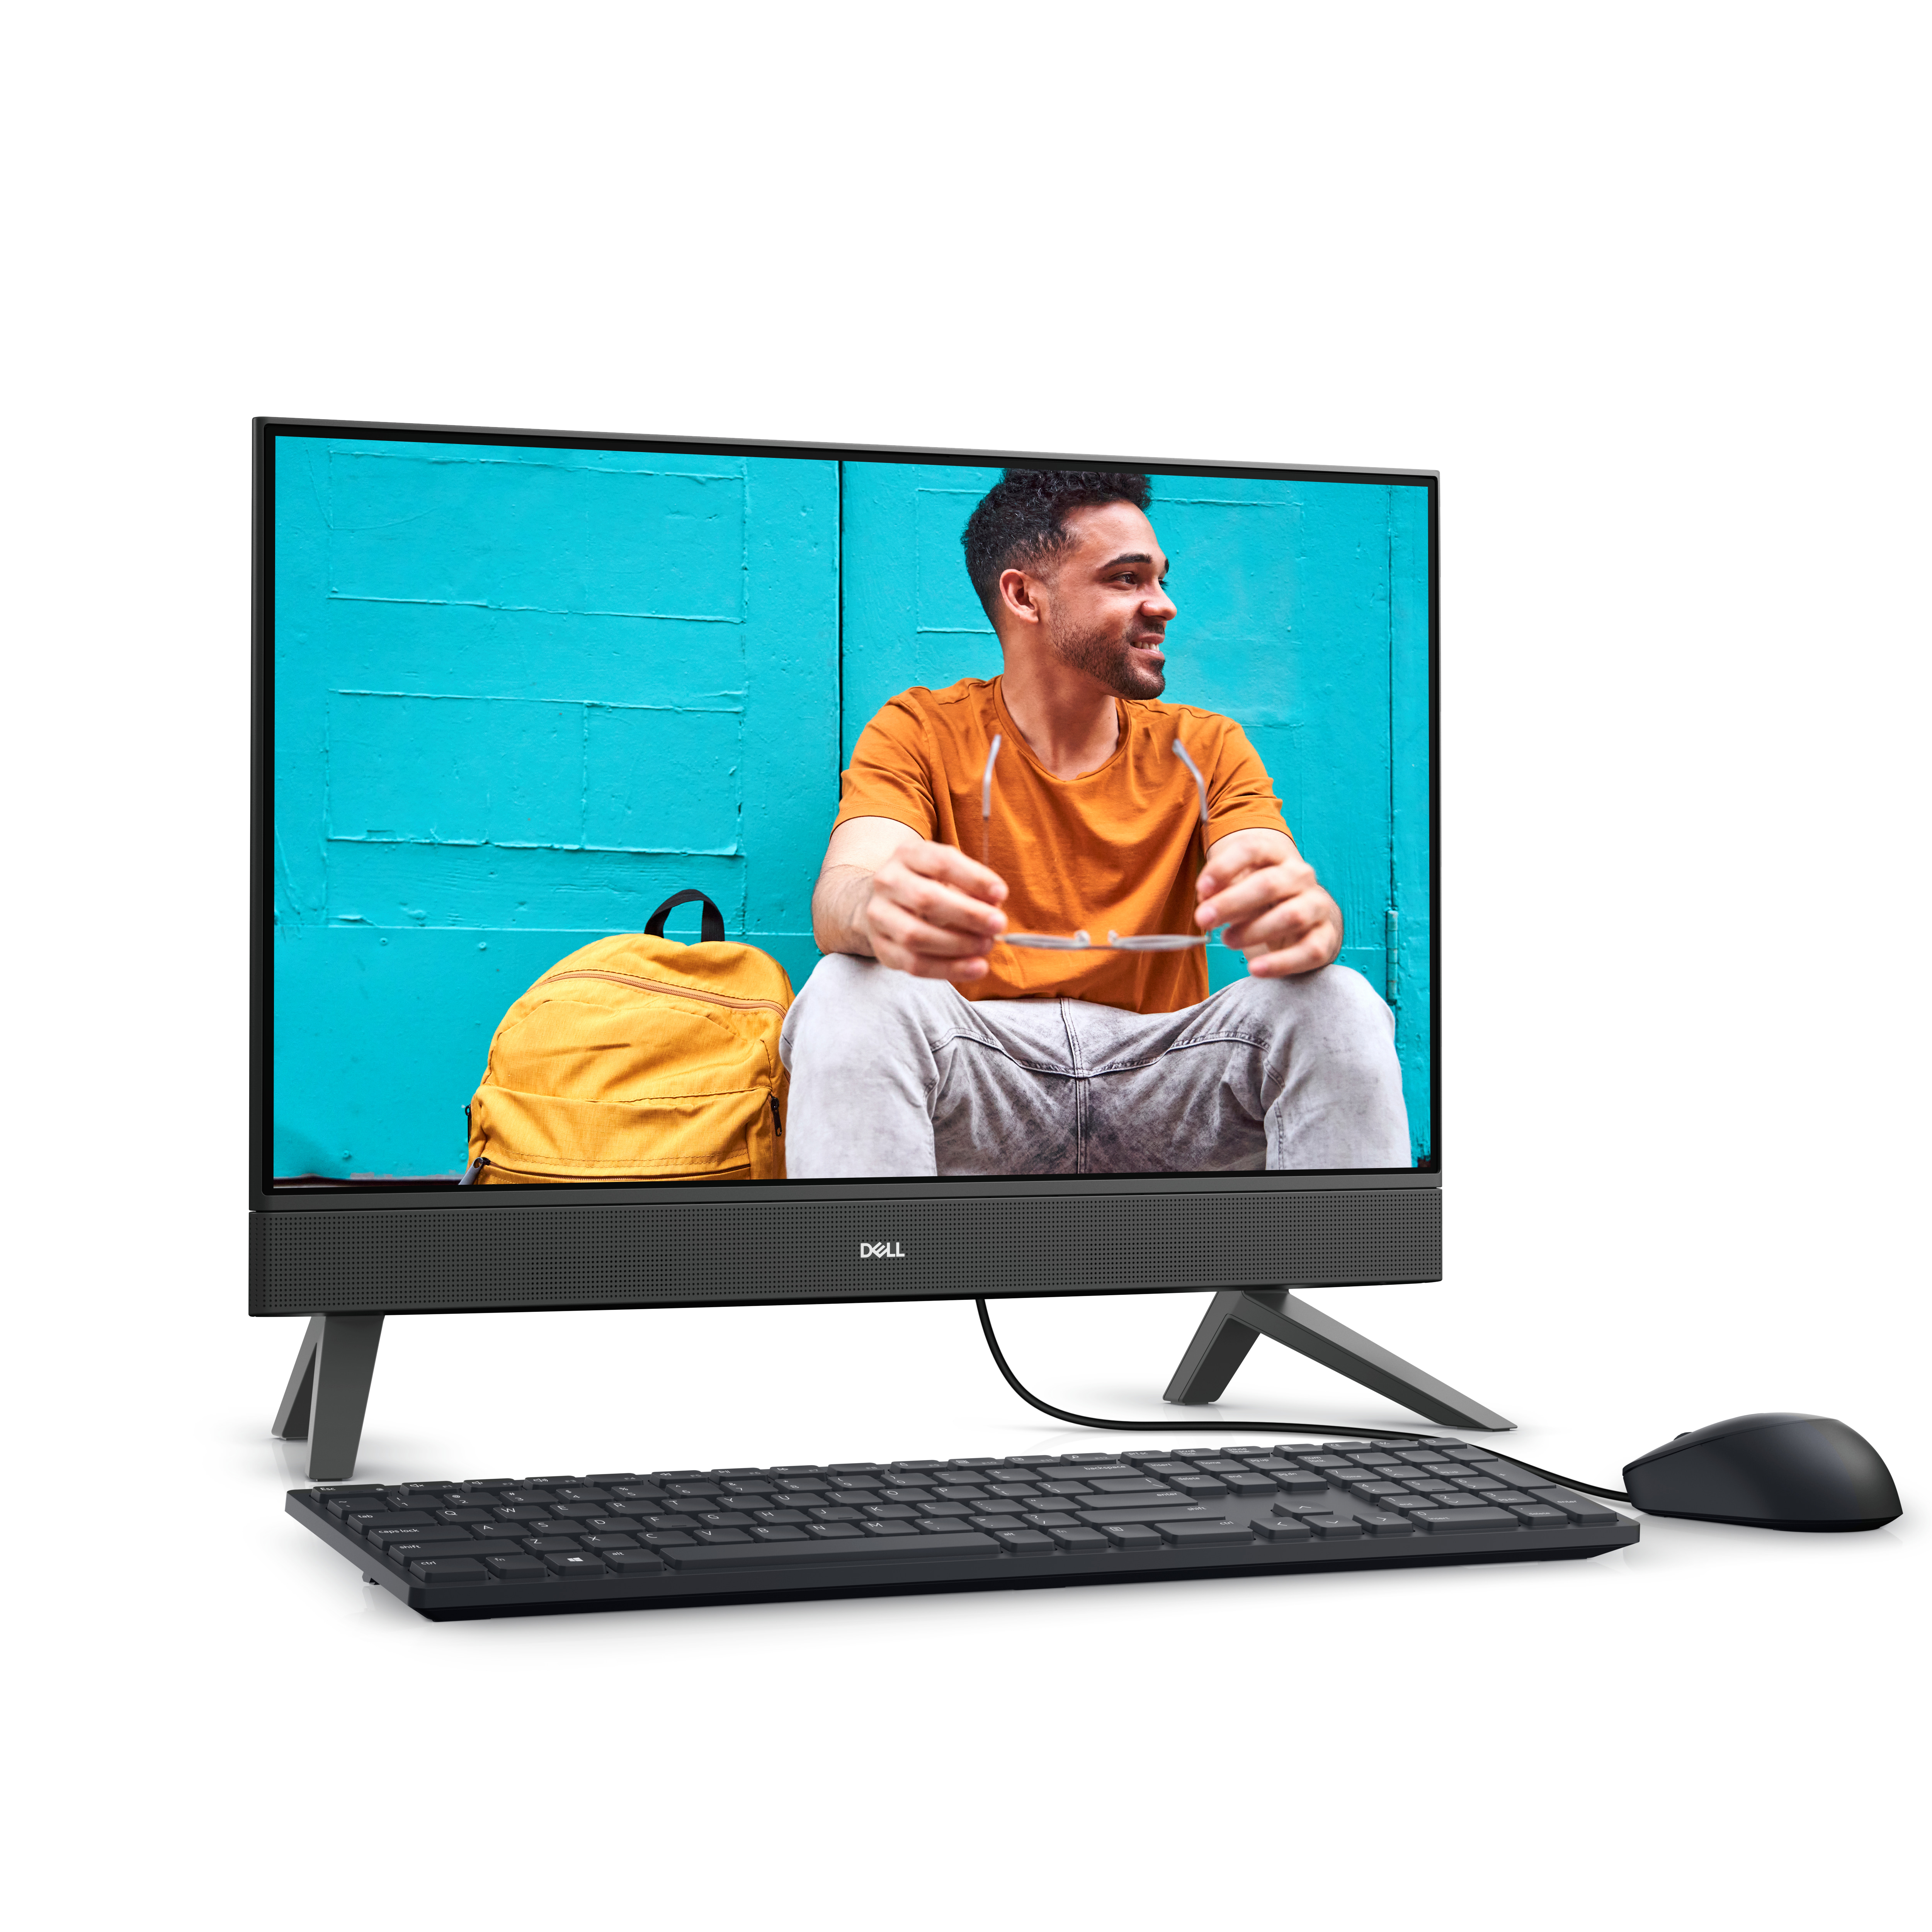 Inspiron 24 5415 (AMD) All in One Desktop | Dell USA